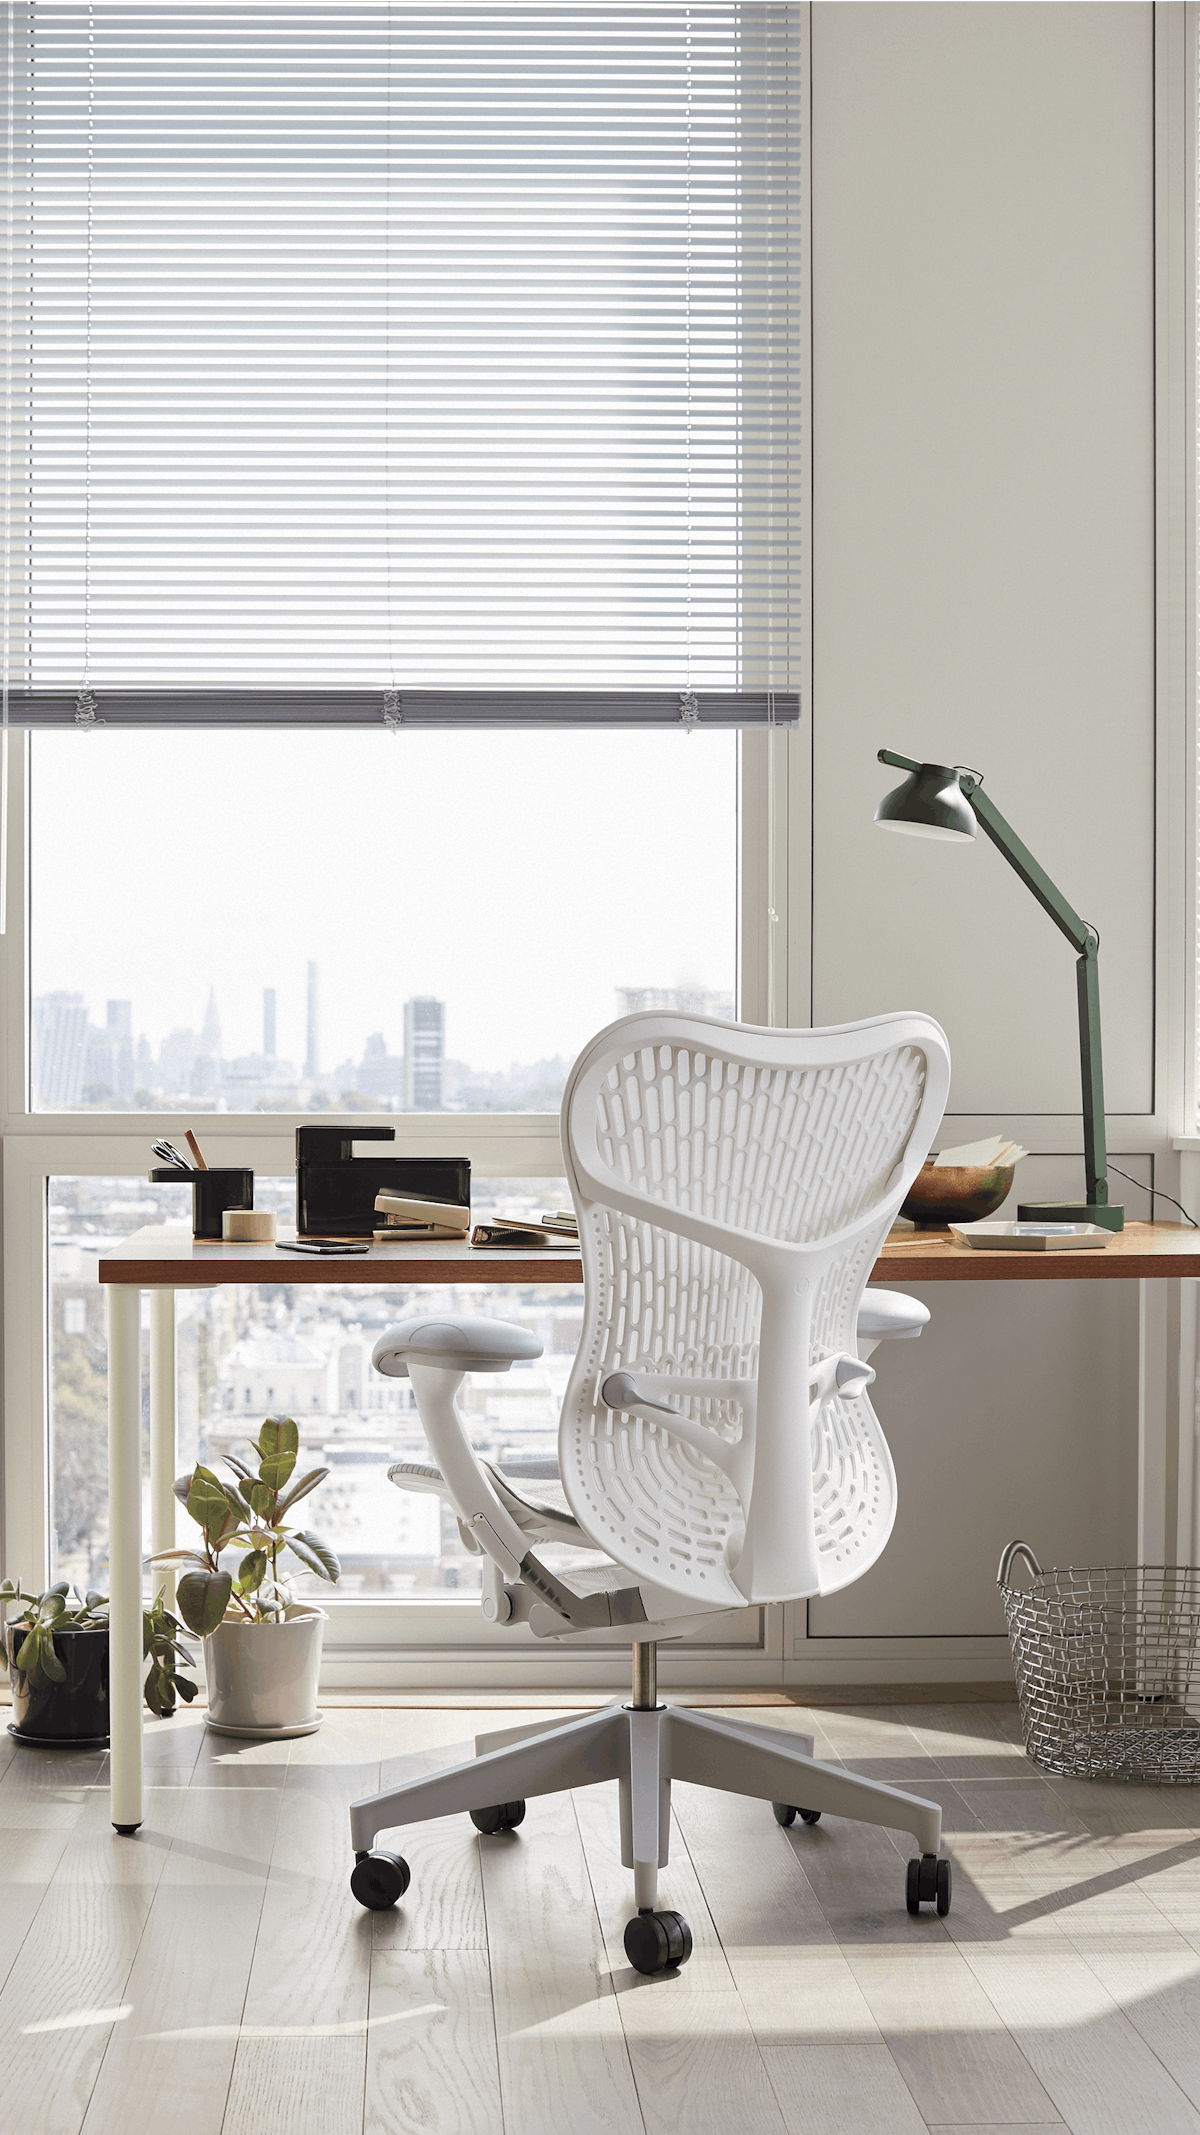 Grey and white Mirra 2 chair with brown and white OE1 Rectangular Table in a home office setting.